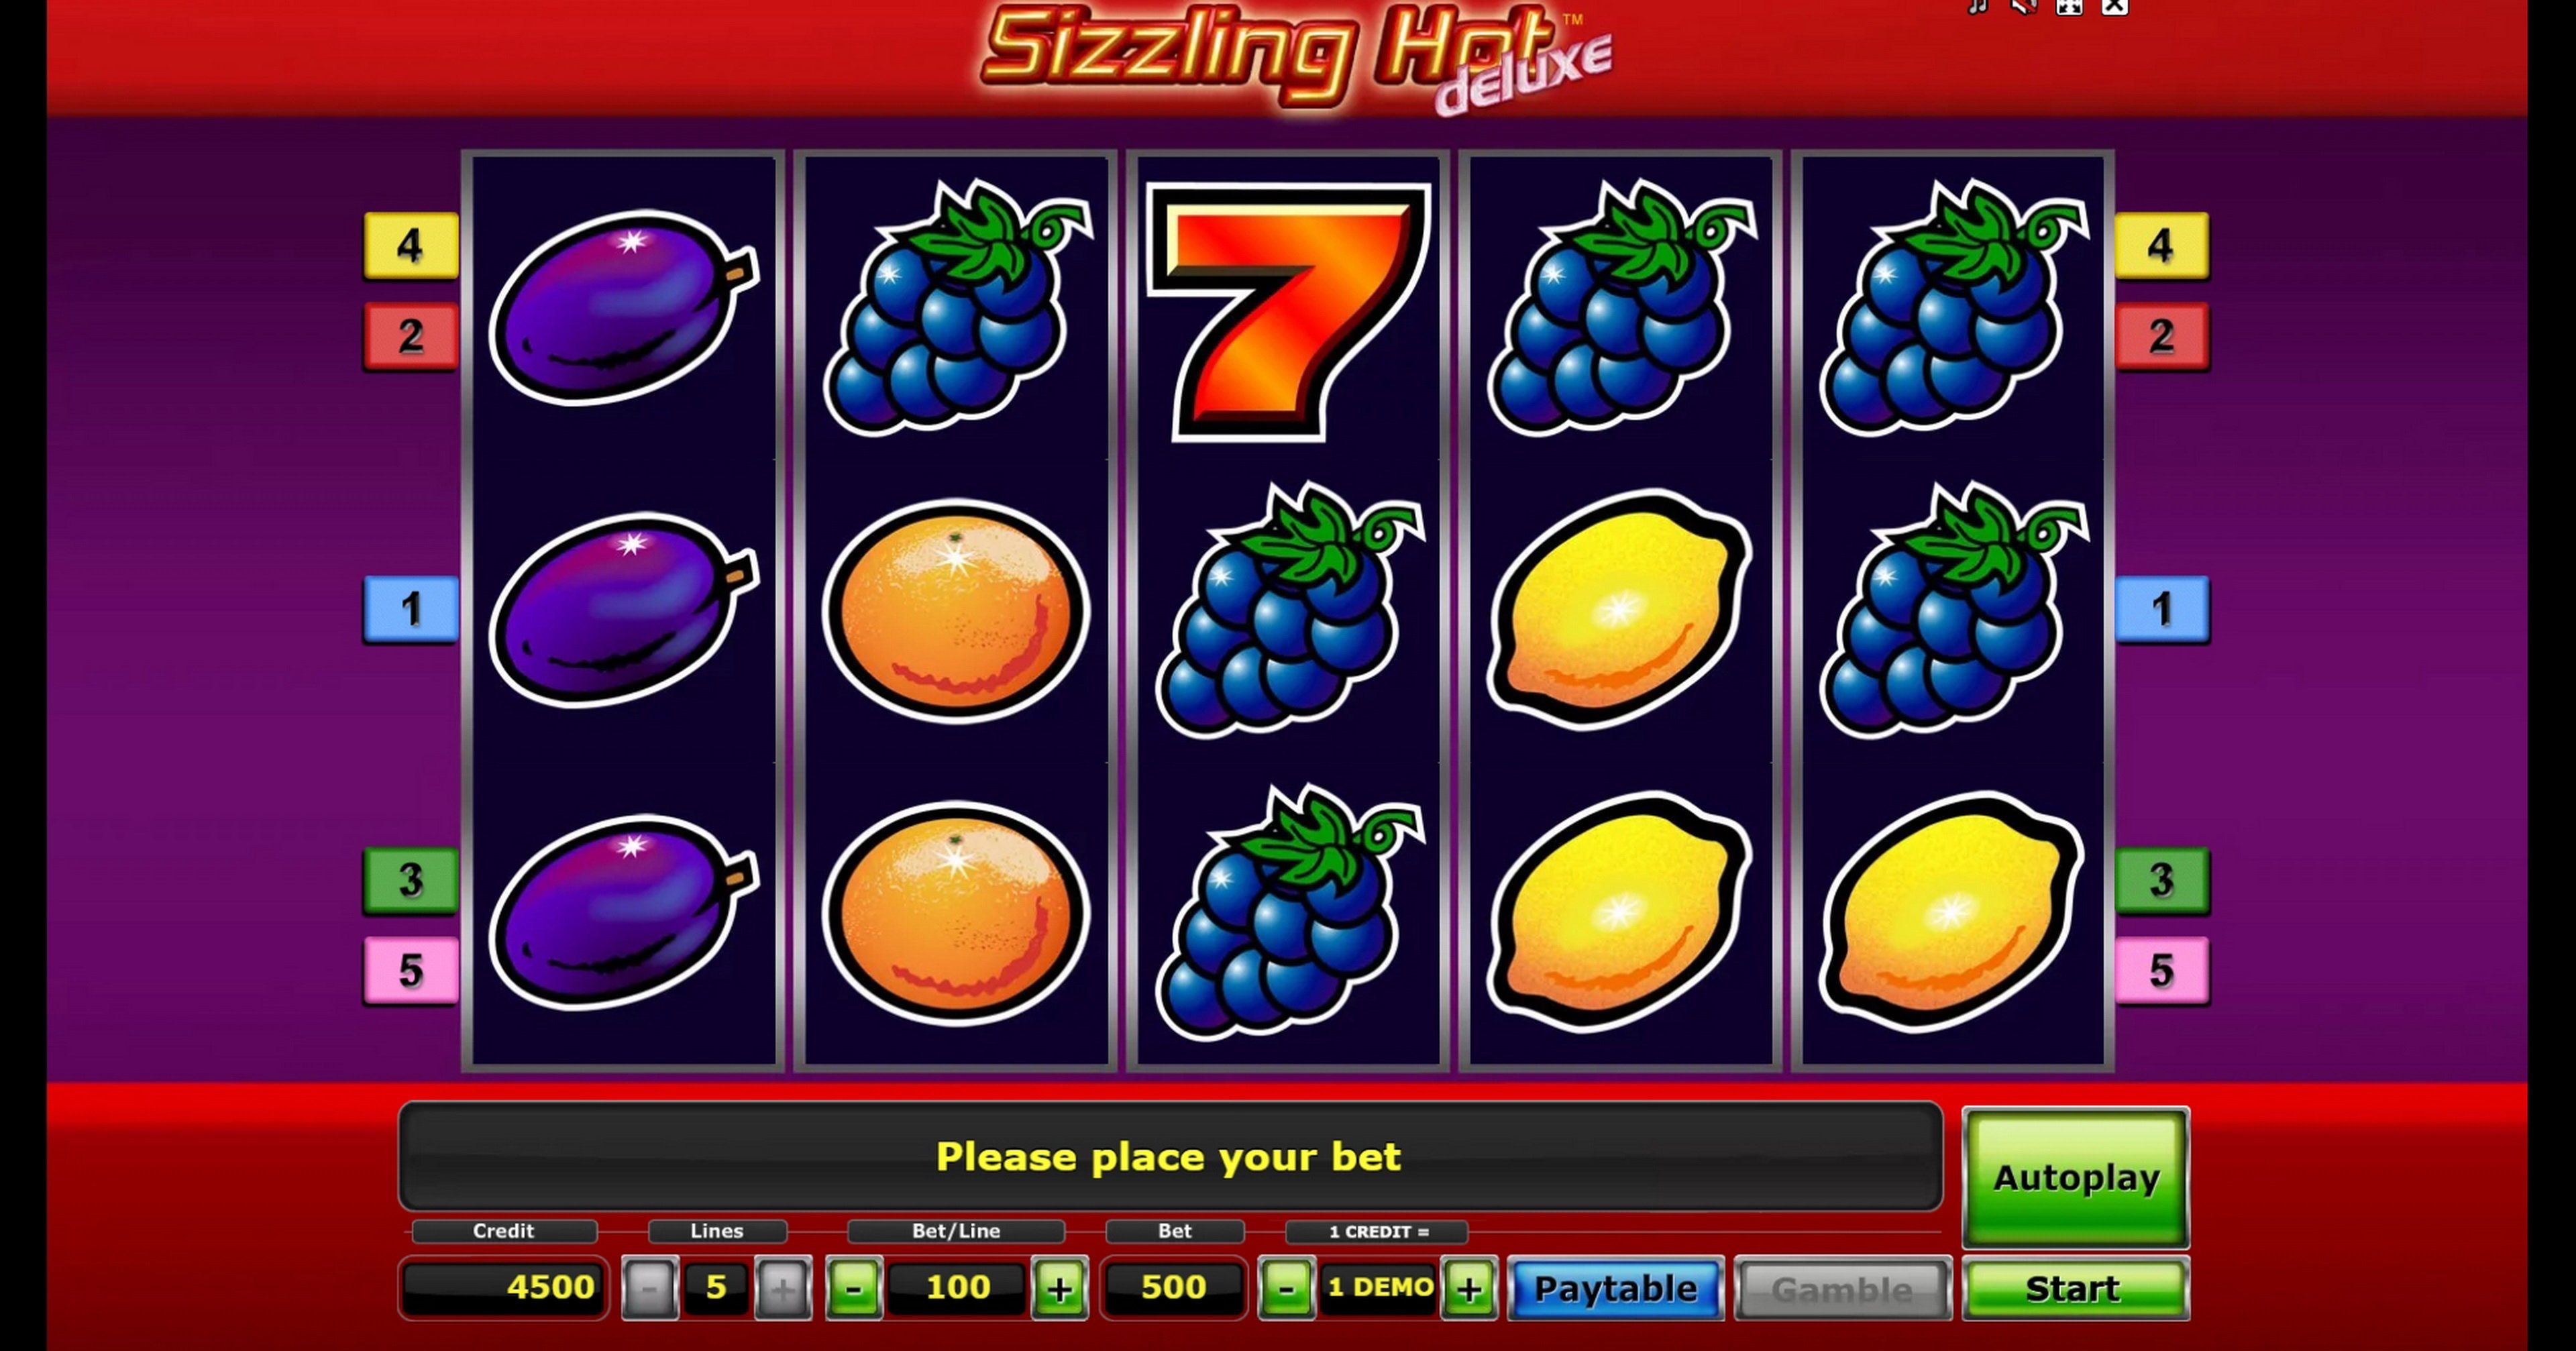 Reels in Sizzling Hot deluxe Slot Game by Greentube